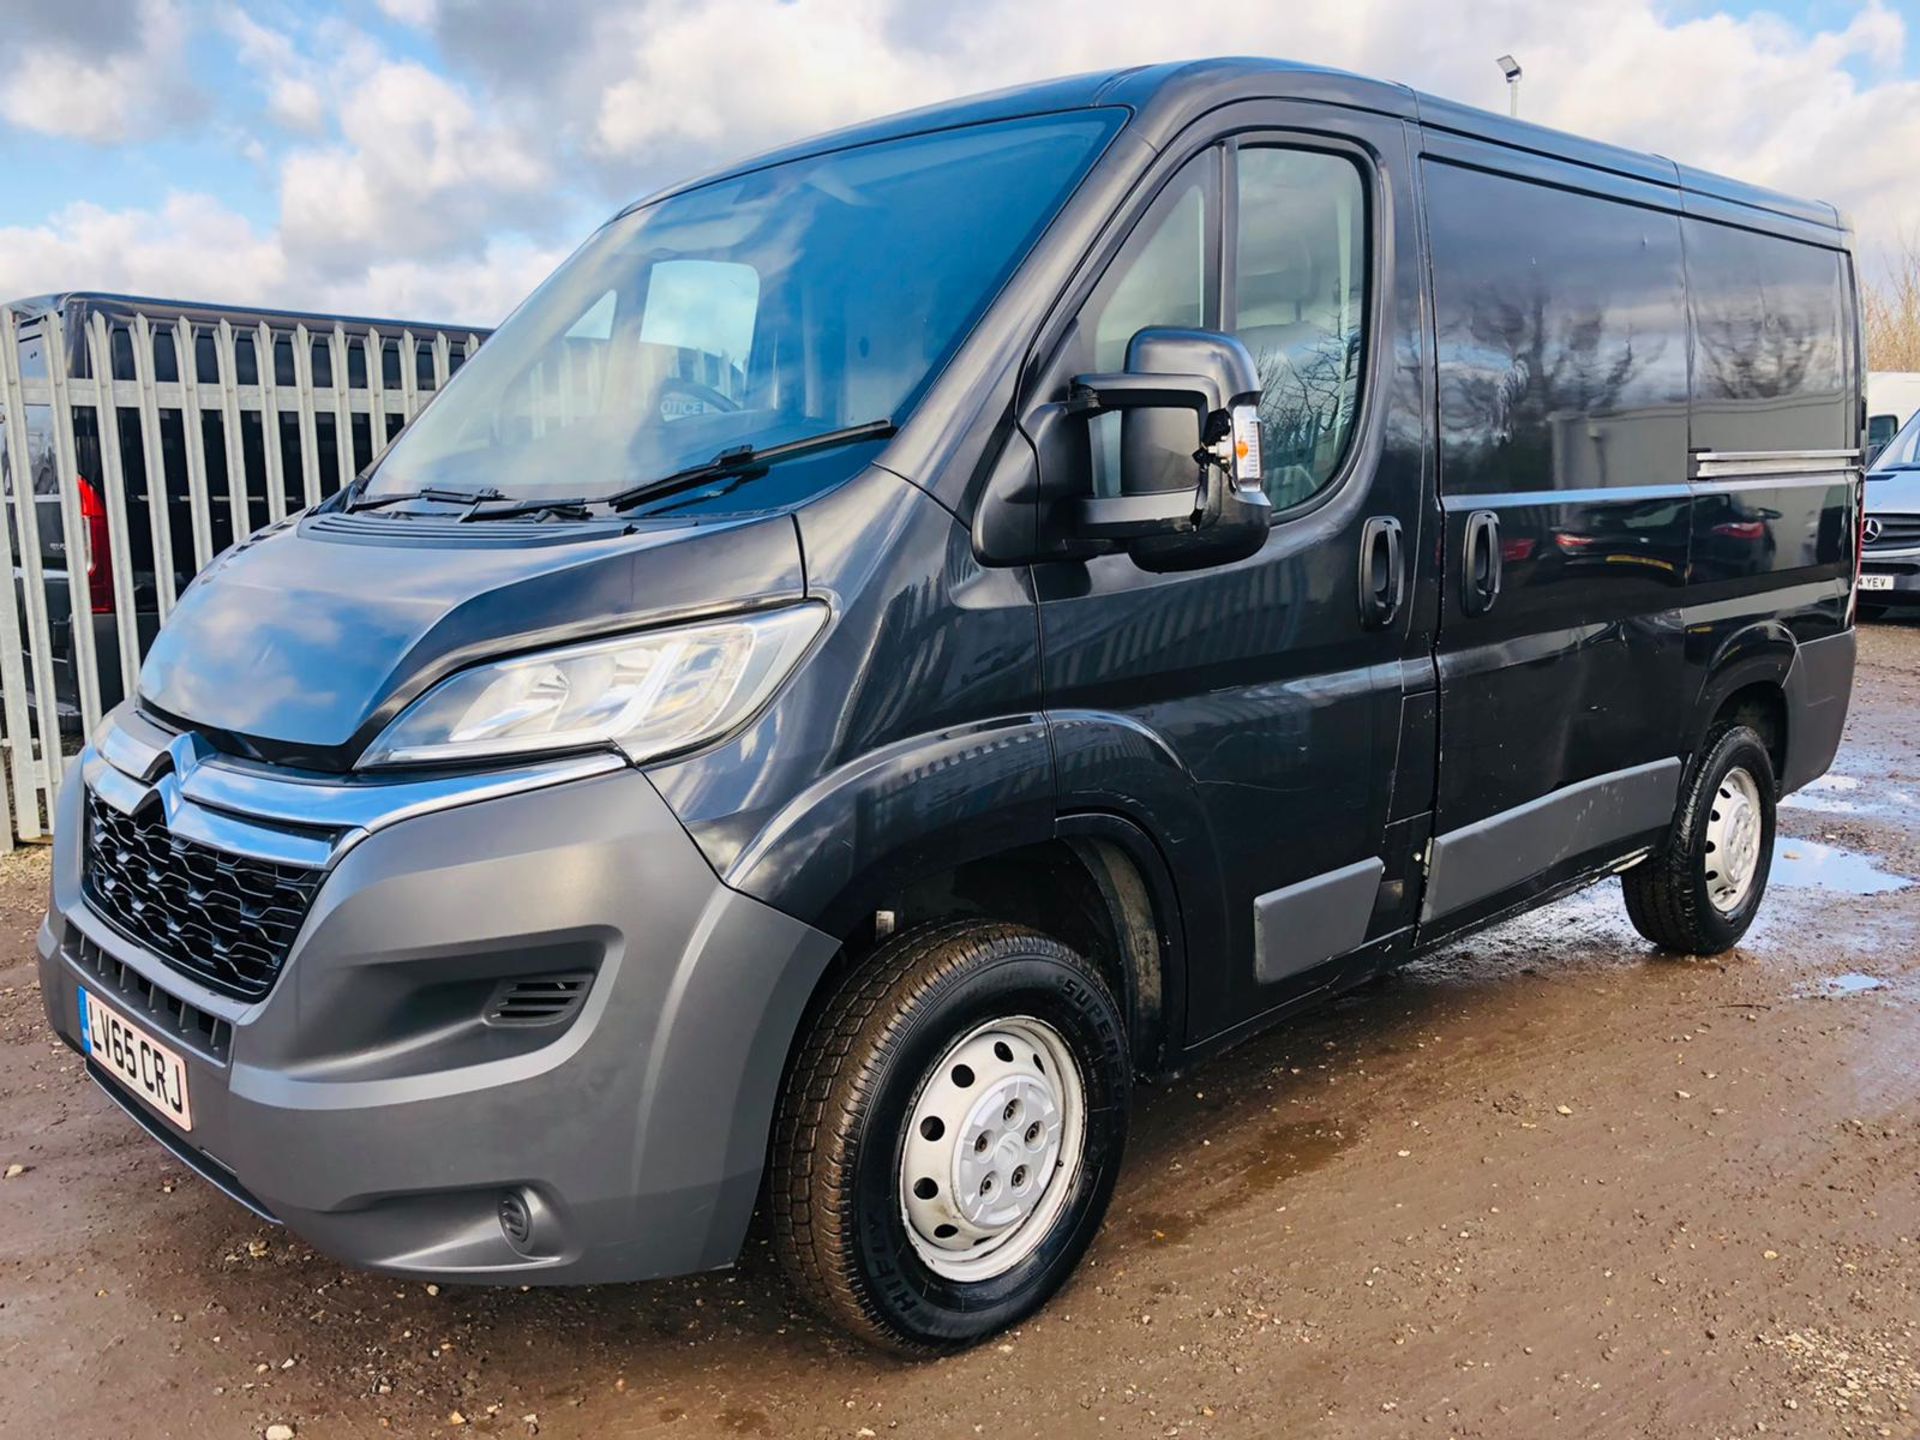 Citroen Relay 2.2 HDI Enterprise L1 H1 2015 '65 Reg' Air Con - ** Low Miles ** Only Done 65k - Image 6 of 21